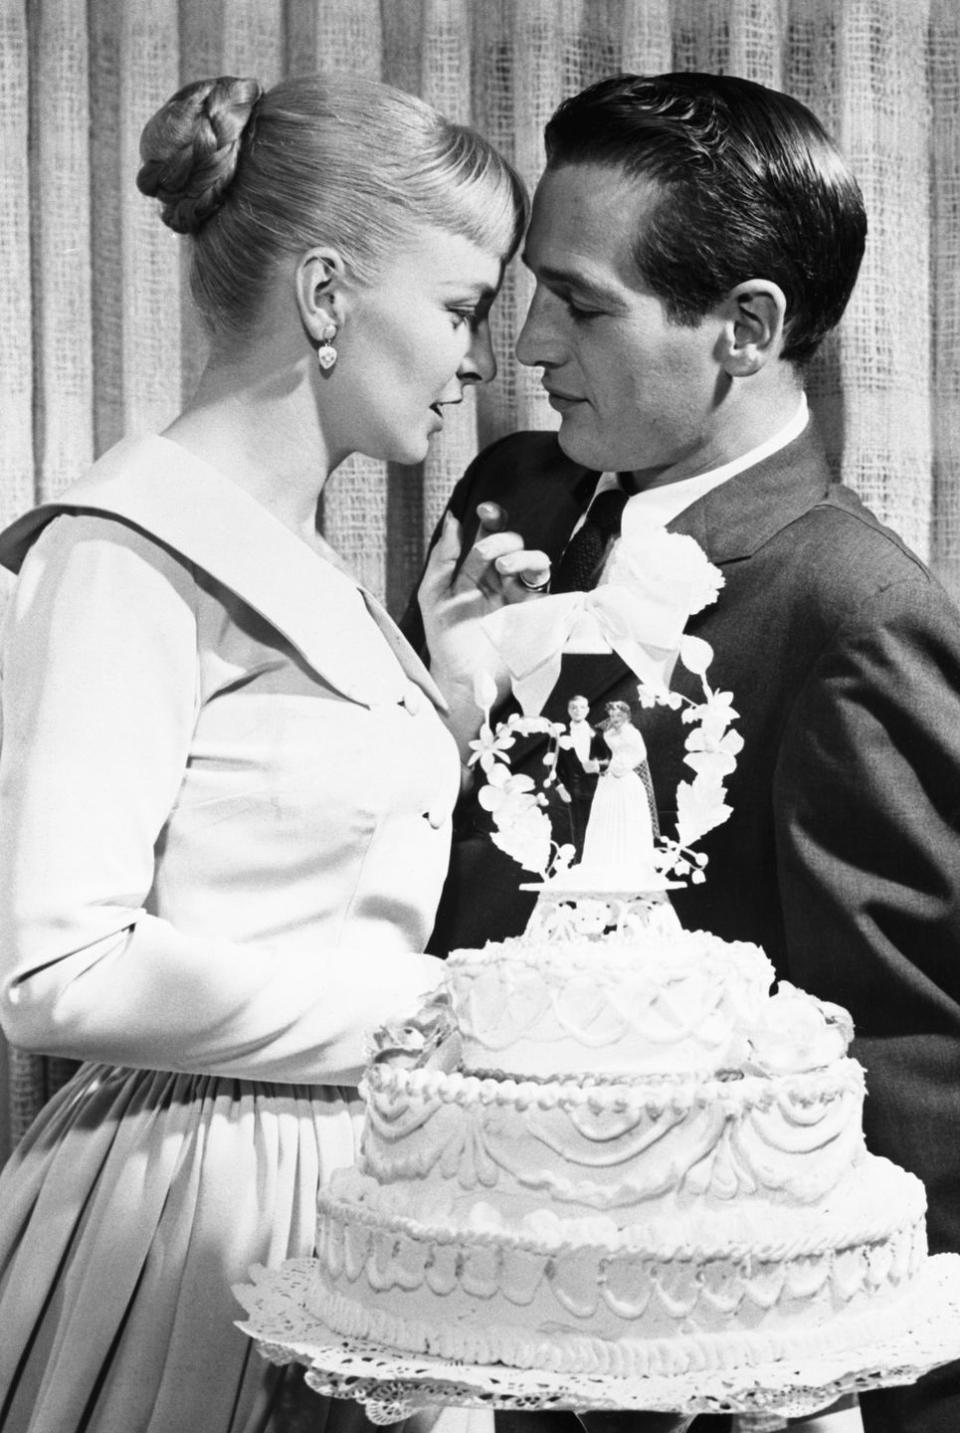 <p>It seems like nothing could break Joanne Woodward and Paul Newman's gaze on their wedding day—not even their cake! The couple was married for 50 years, until Newman's death in 2008.</p>